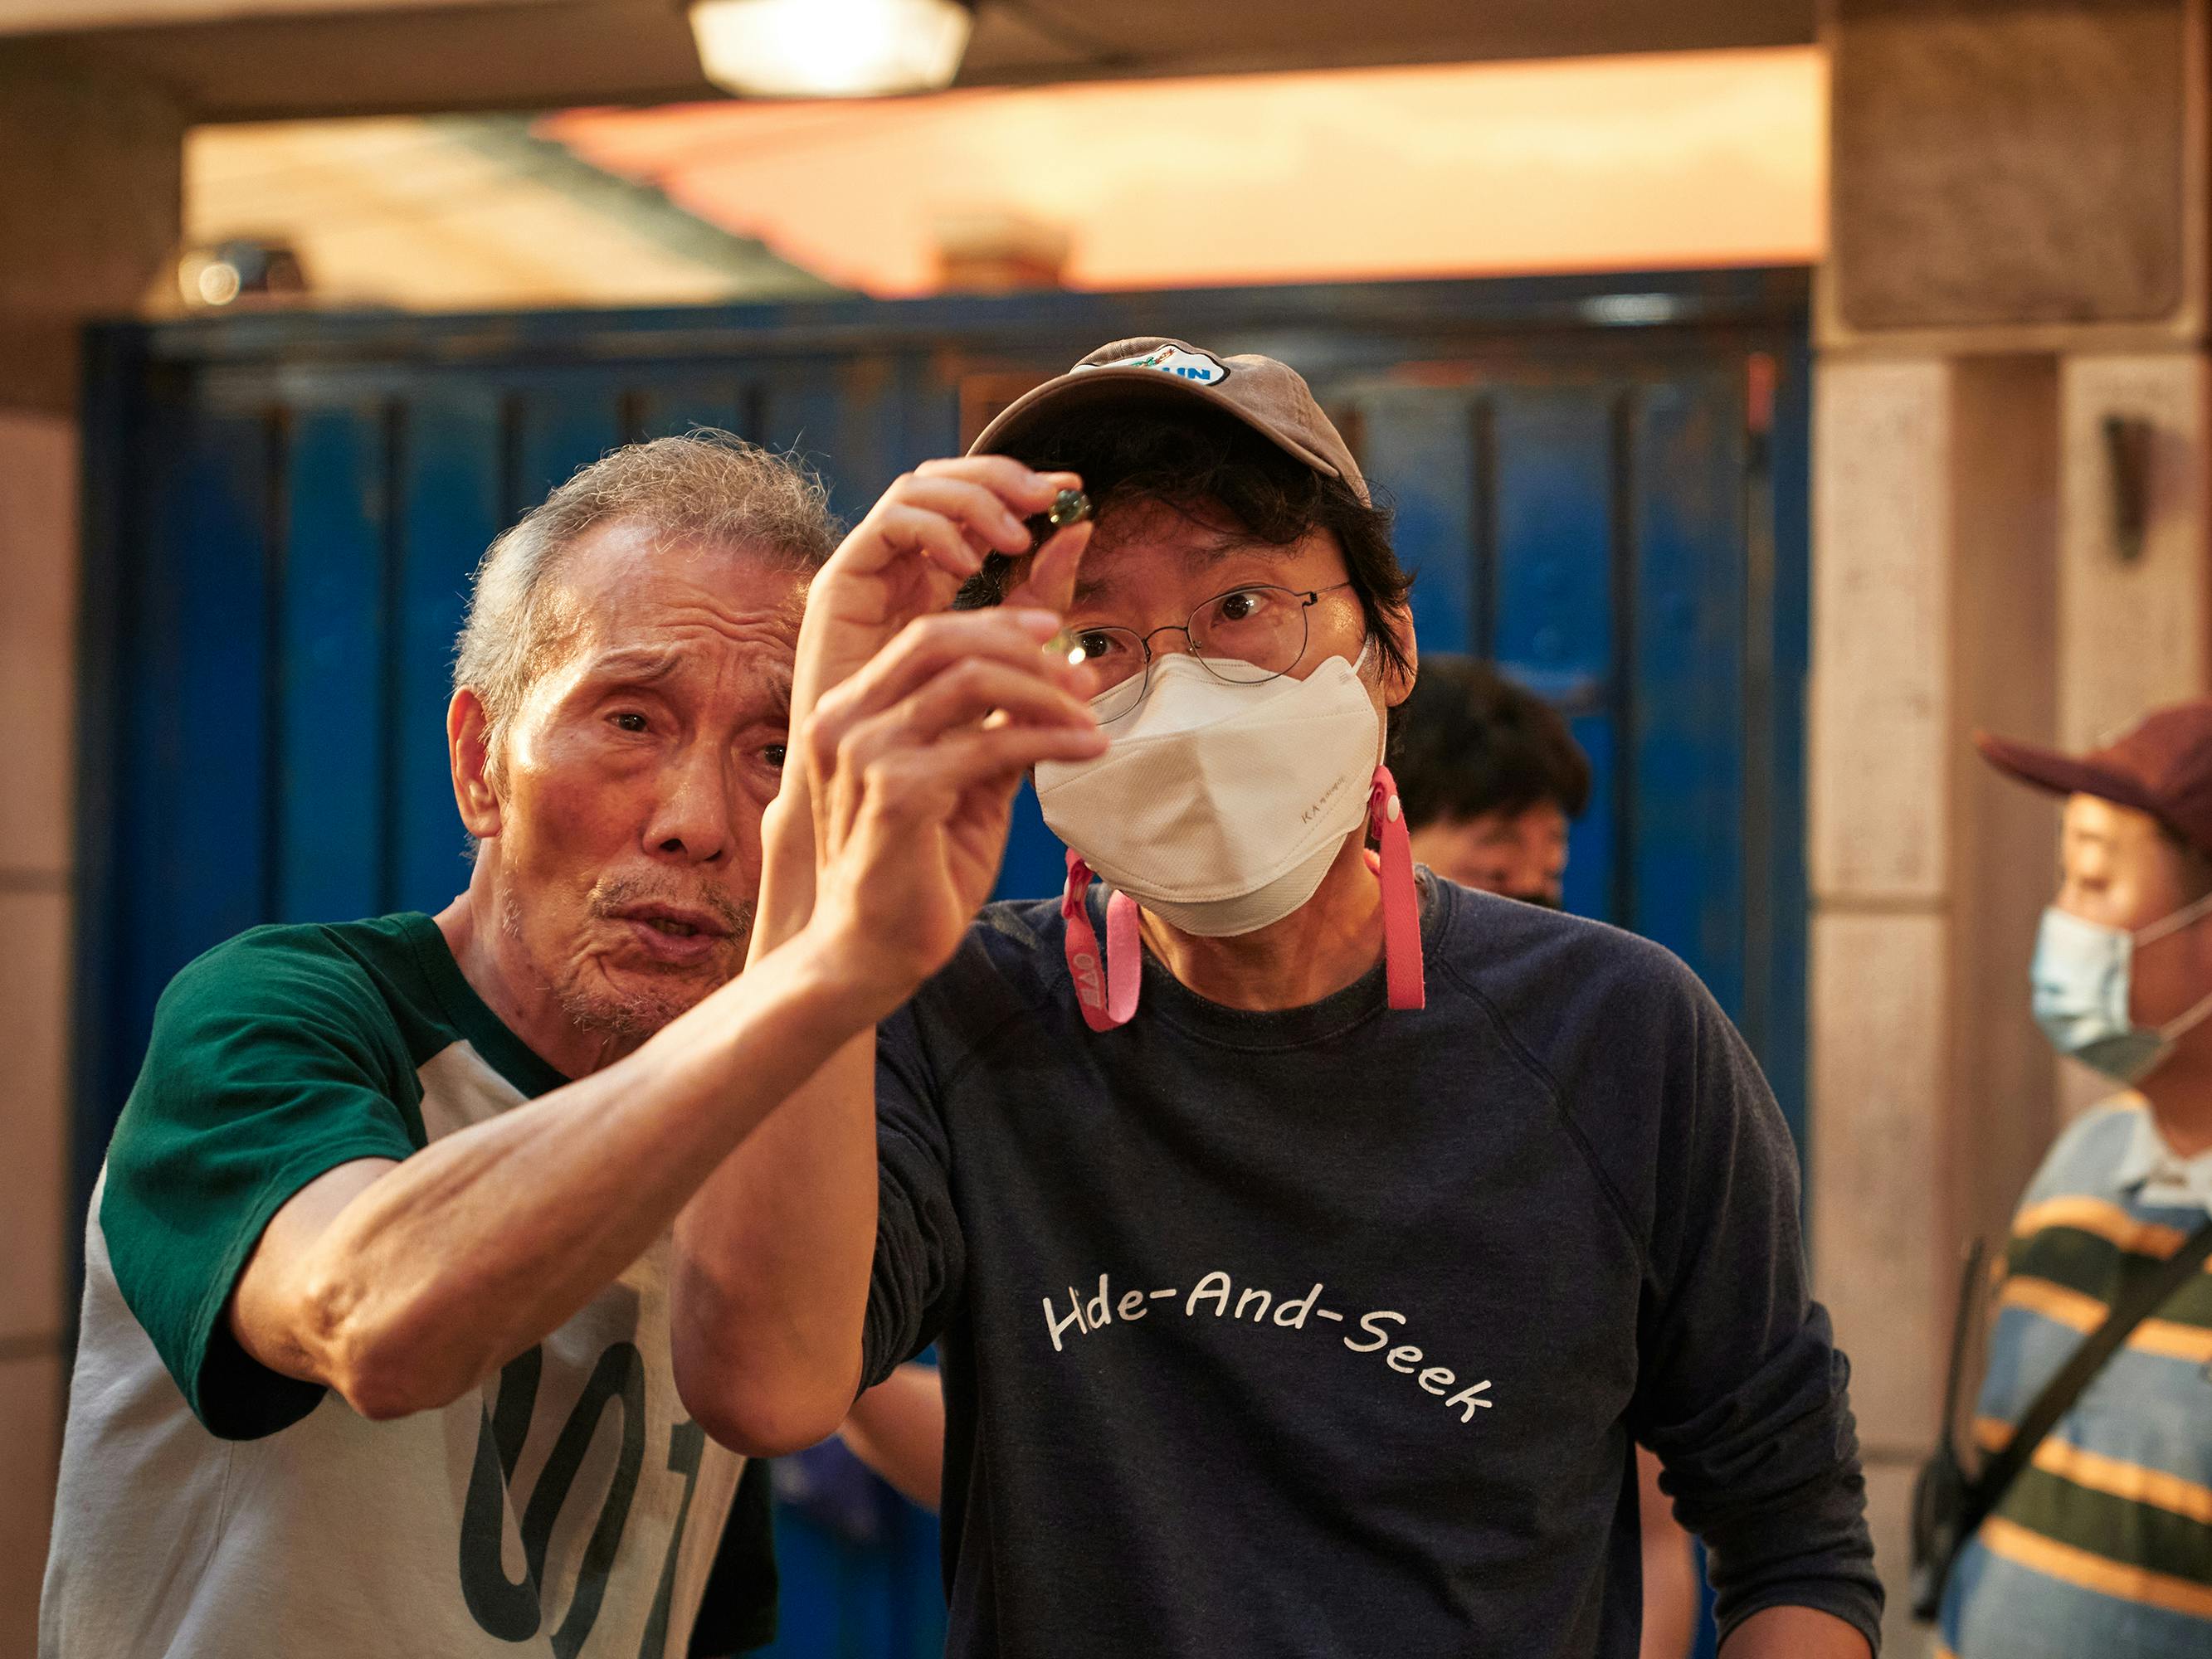 Oh Young-soo and Hwang Dong-hyuk look at a marble. Young-soo wears a white and green baseball style shirt. Director Hwang wears a 'hide-and-seek- black t-shirt, baseball hat, and white mask.